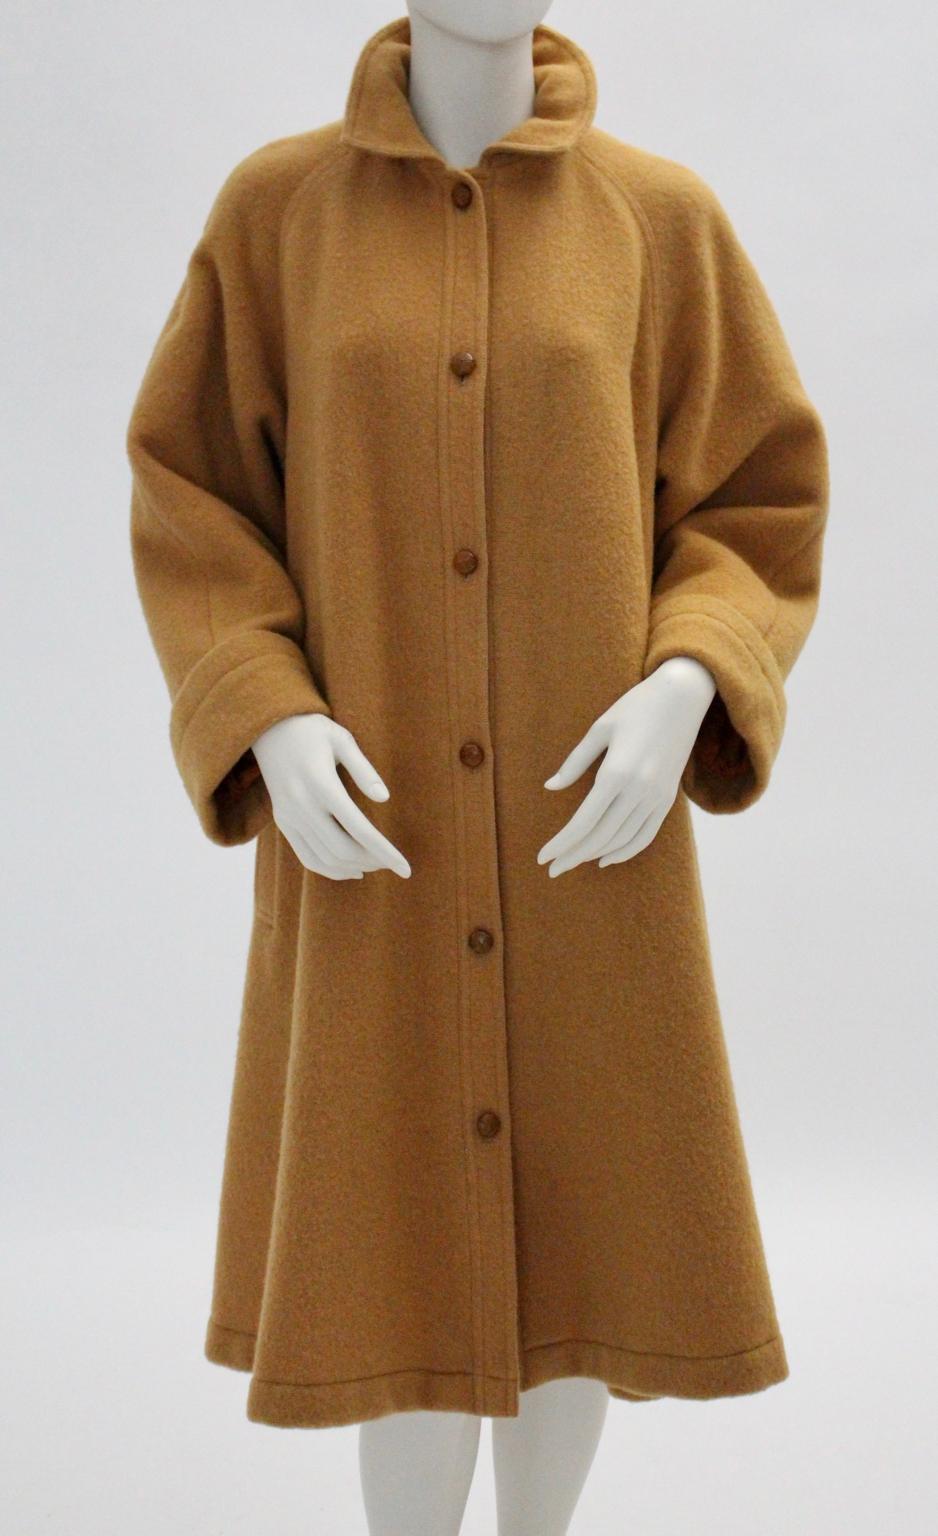 This Coat was designed by Guy Laroche Diffusion Paris 1970s and made in France.
The Coat has raglan sleeves with cuffs, shoulder pads for a great silhouette and six leather covered buttons for closure.
Two pockets on each side.

Labelled
French